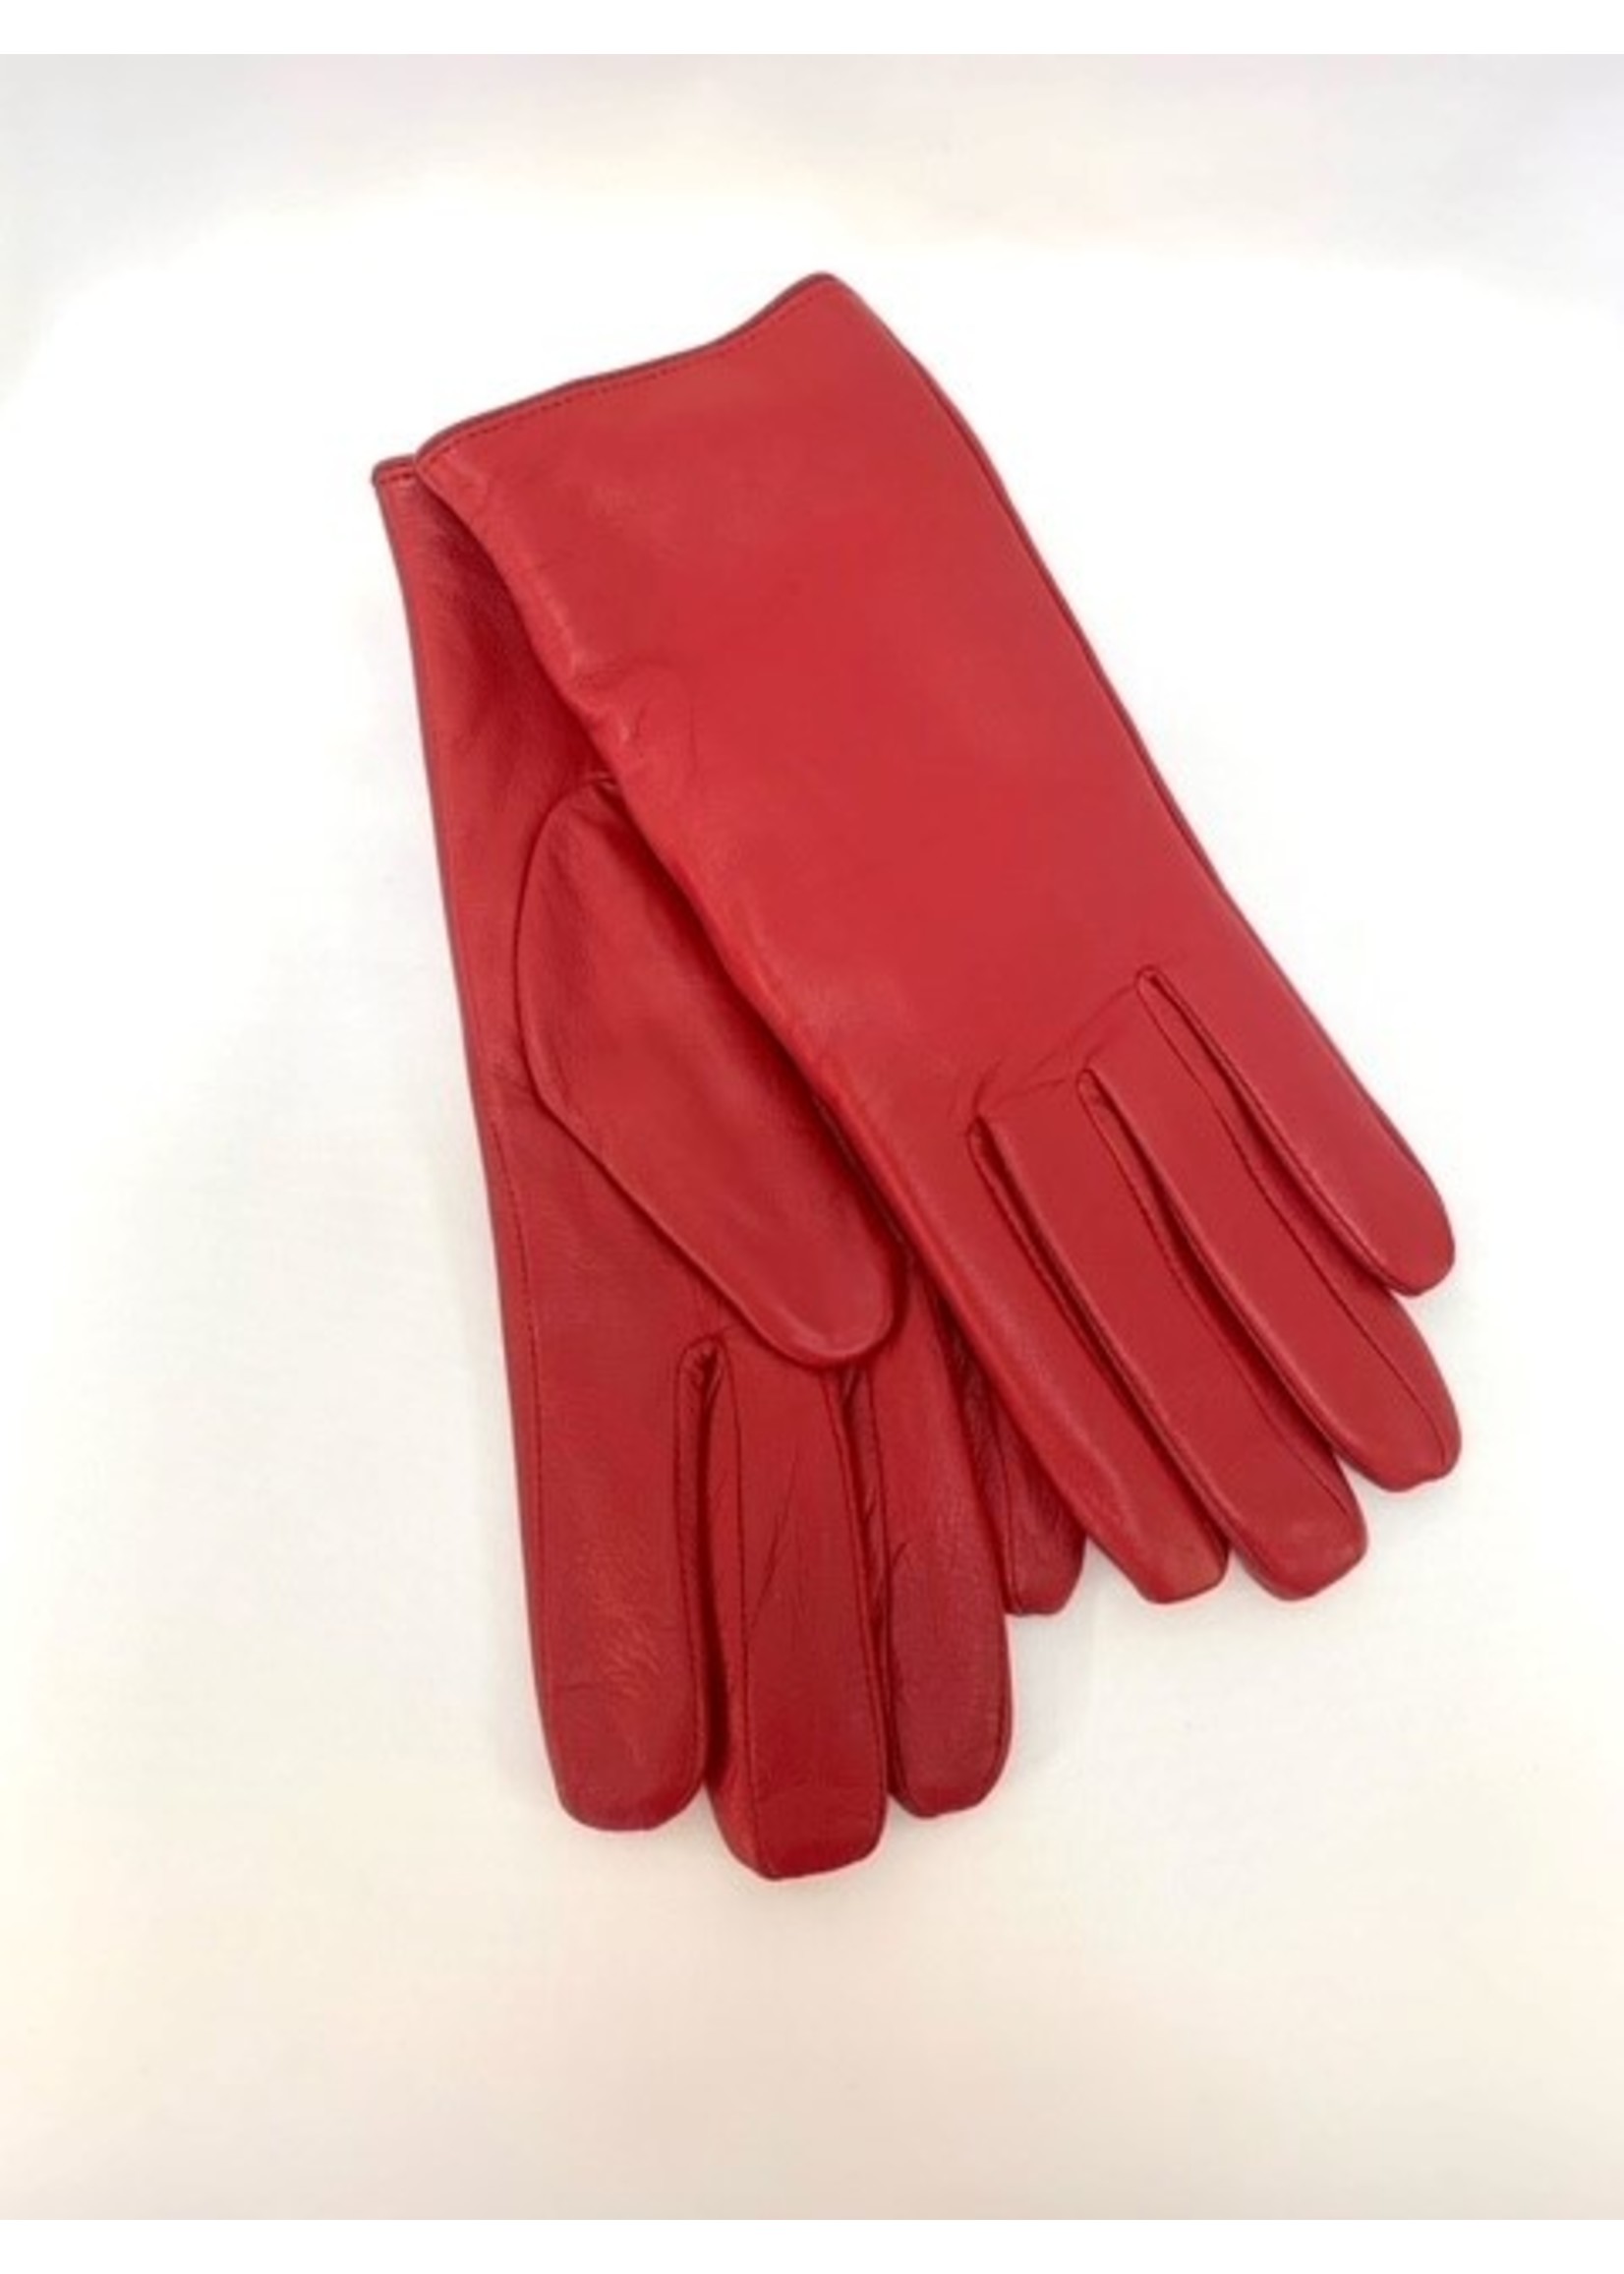 Albee leather gloves